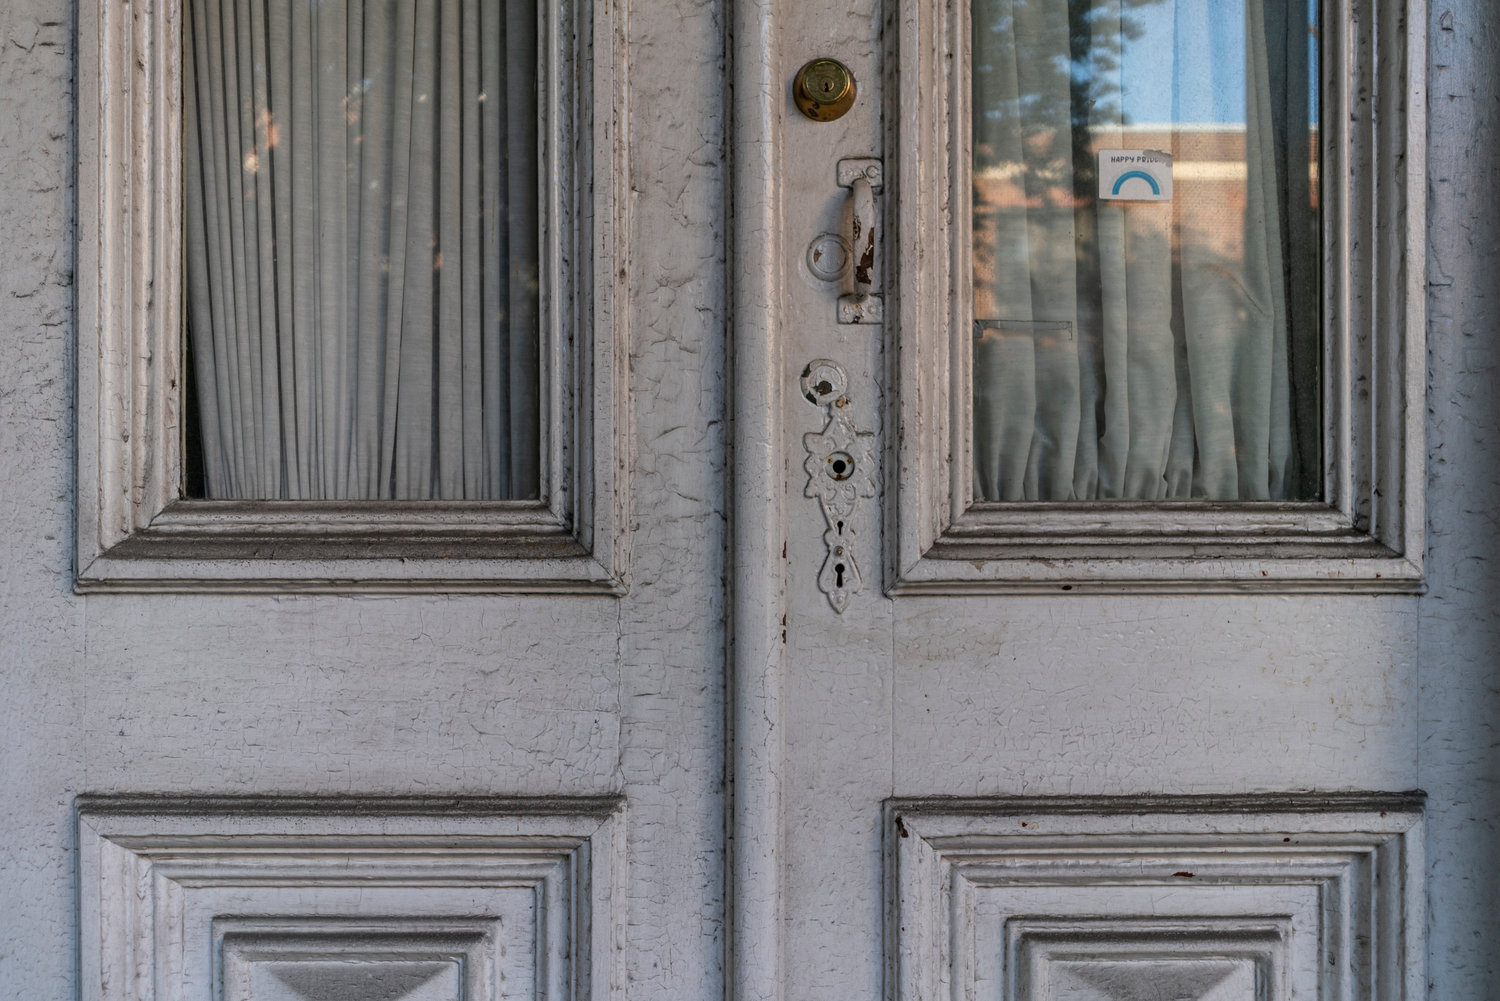 Chipping white paint covers the old doorknob and keyhole at 3029 Godwin Terrace. For the first time in decades, the home has changed hands, going to a nearby developer for $1.5 million, and almost ensuring its days are numbered.